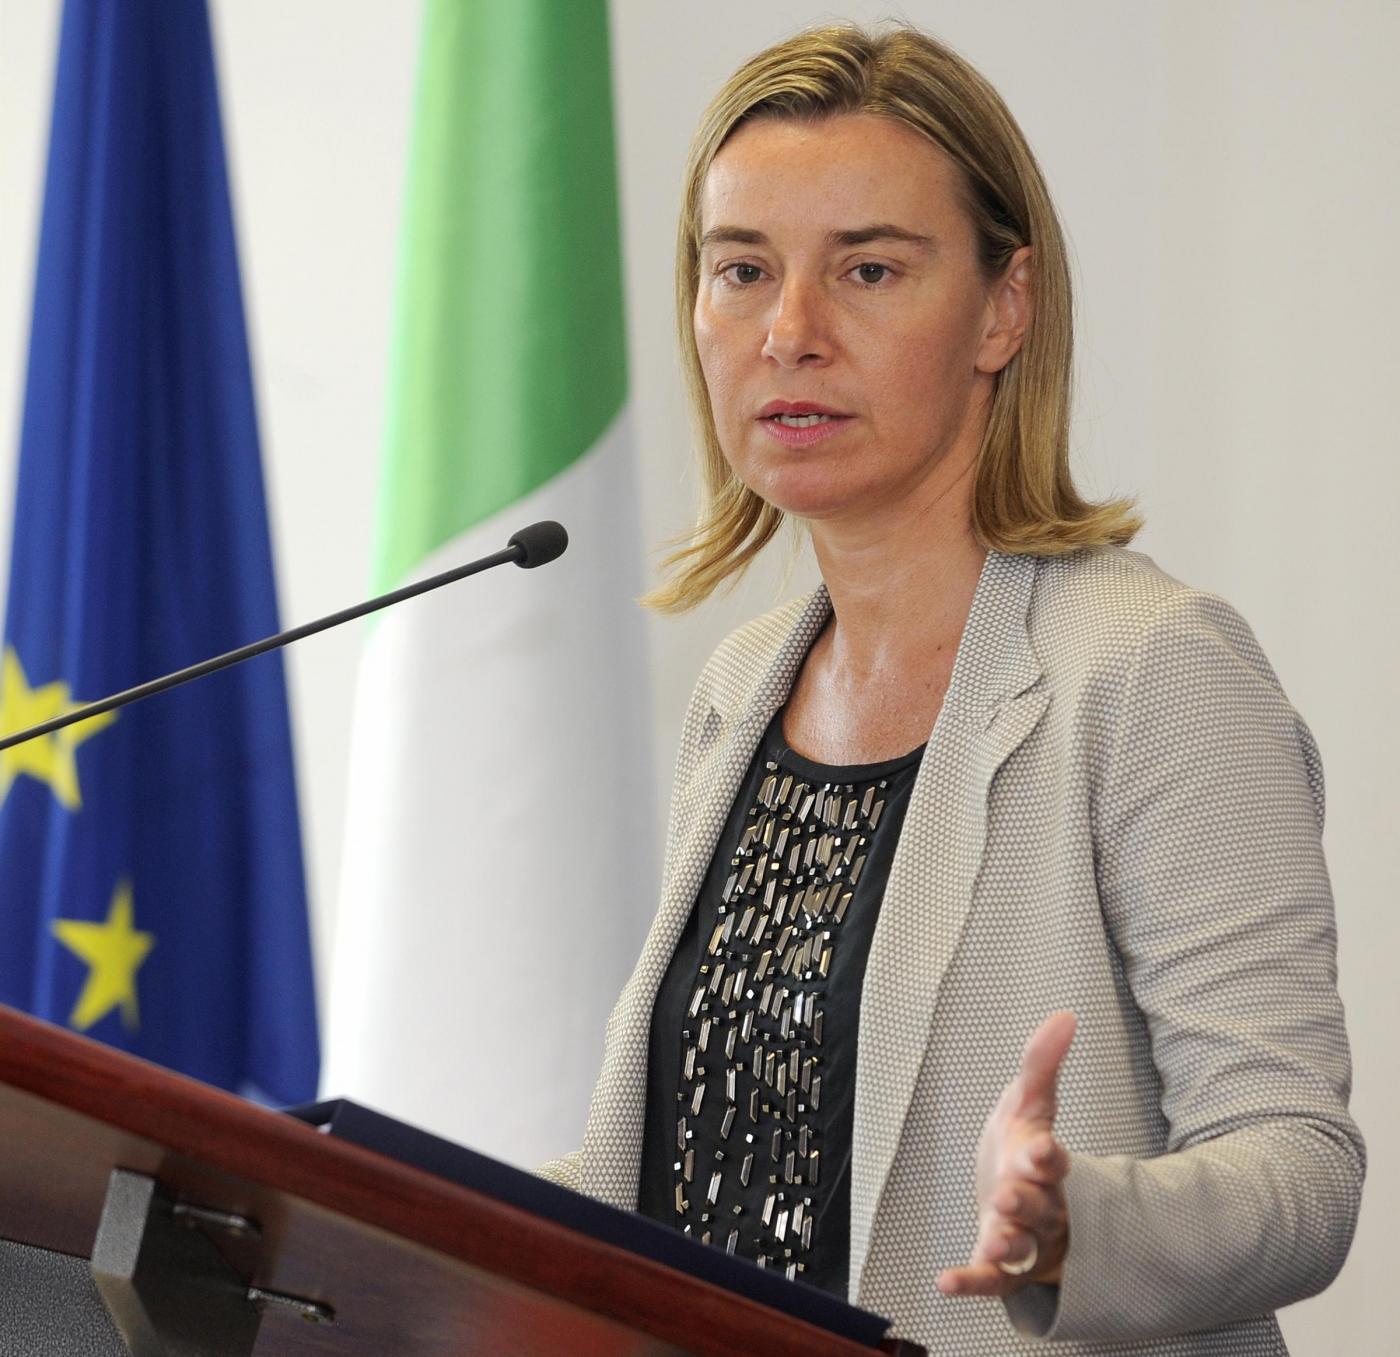 statement-by-federica-mogherini-on-the-law-on-specialist-chambers-and